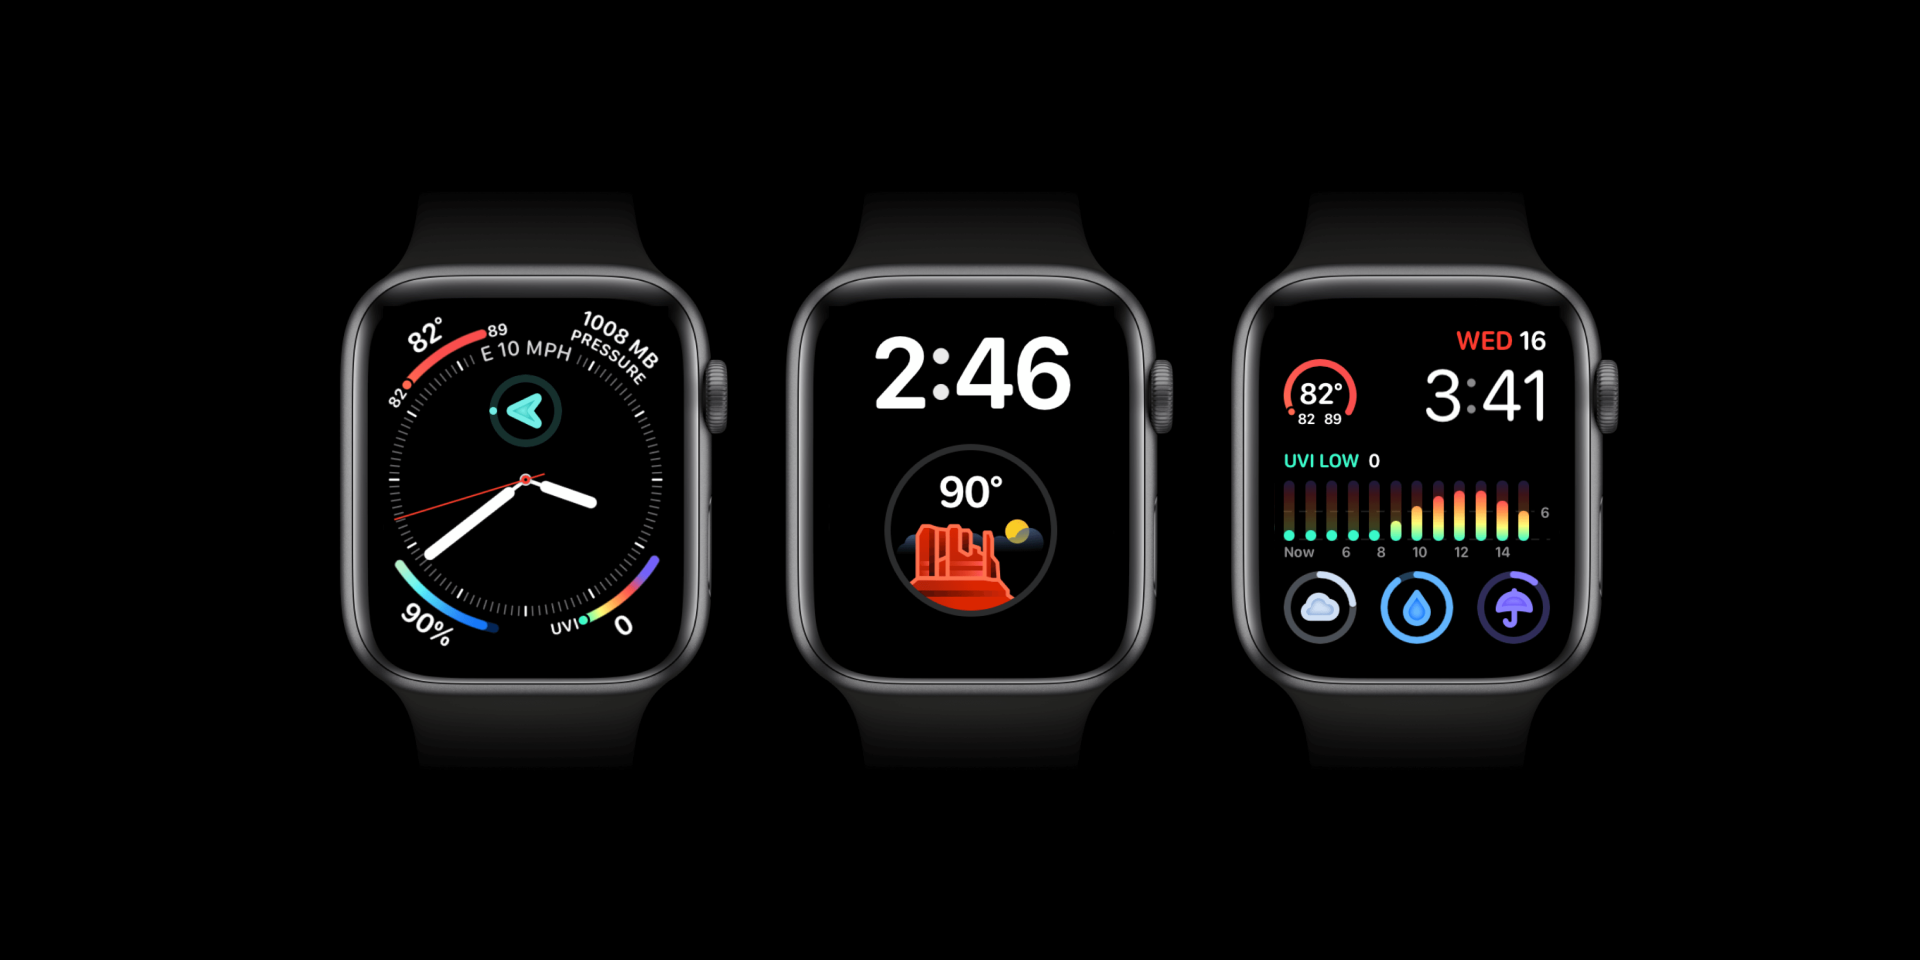 Multiple complications and watch faces